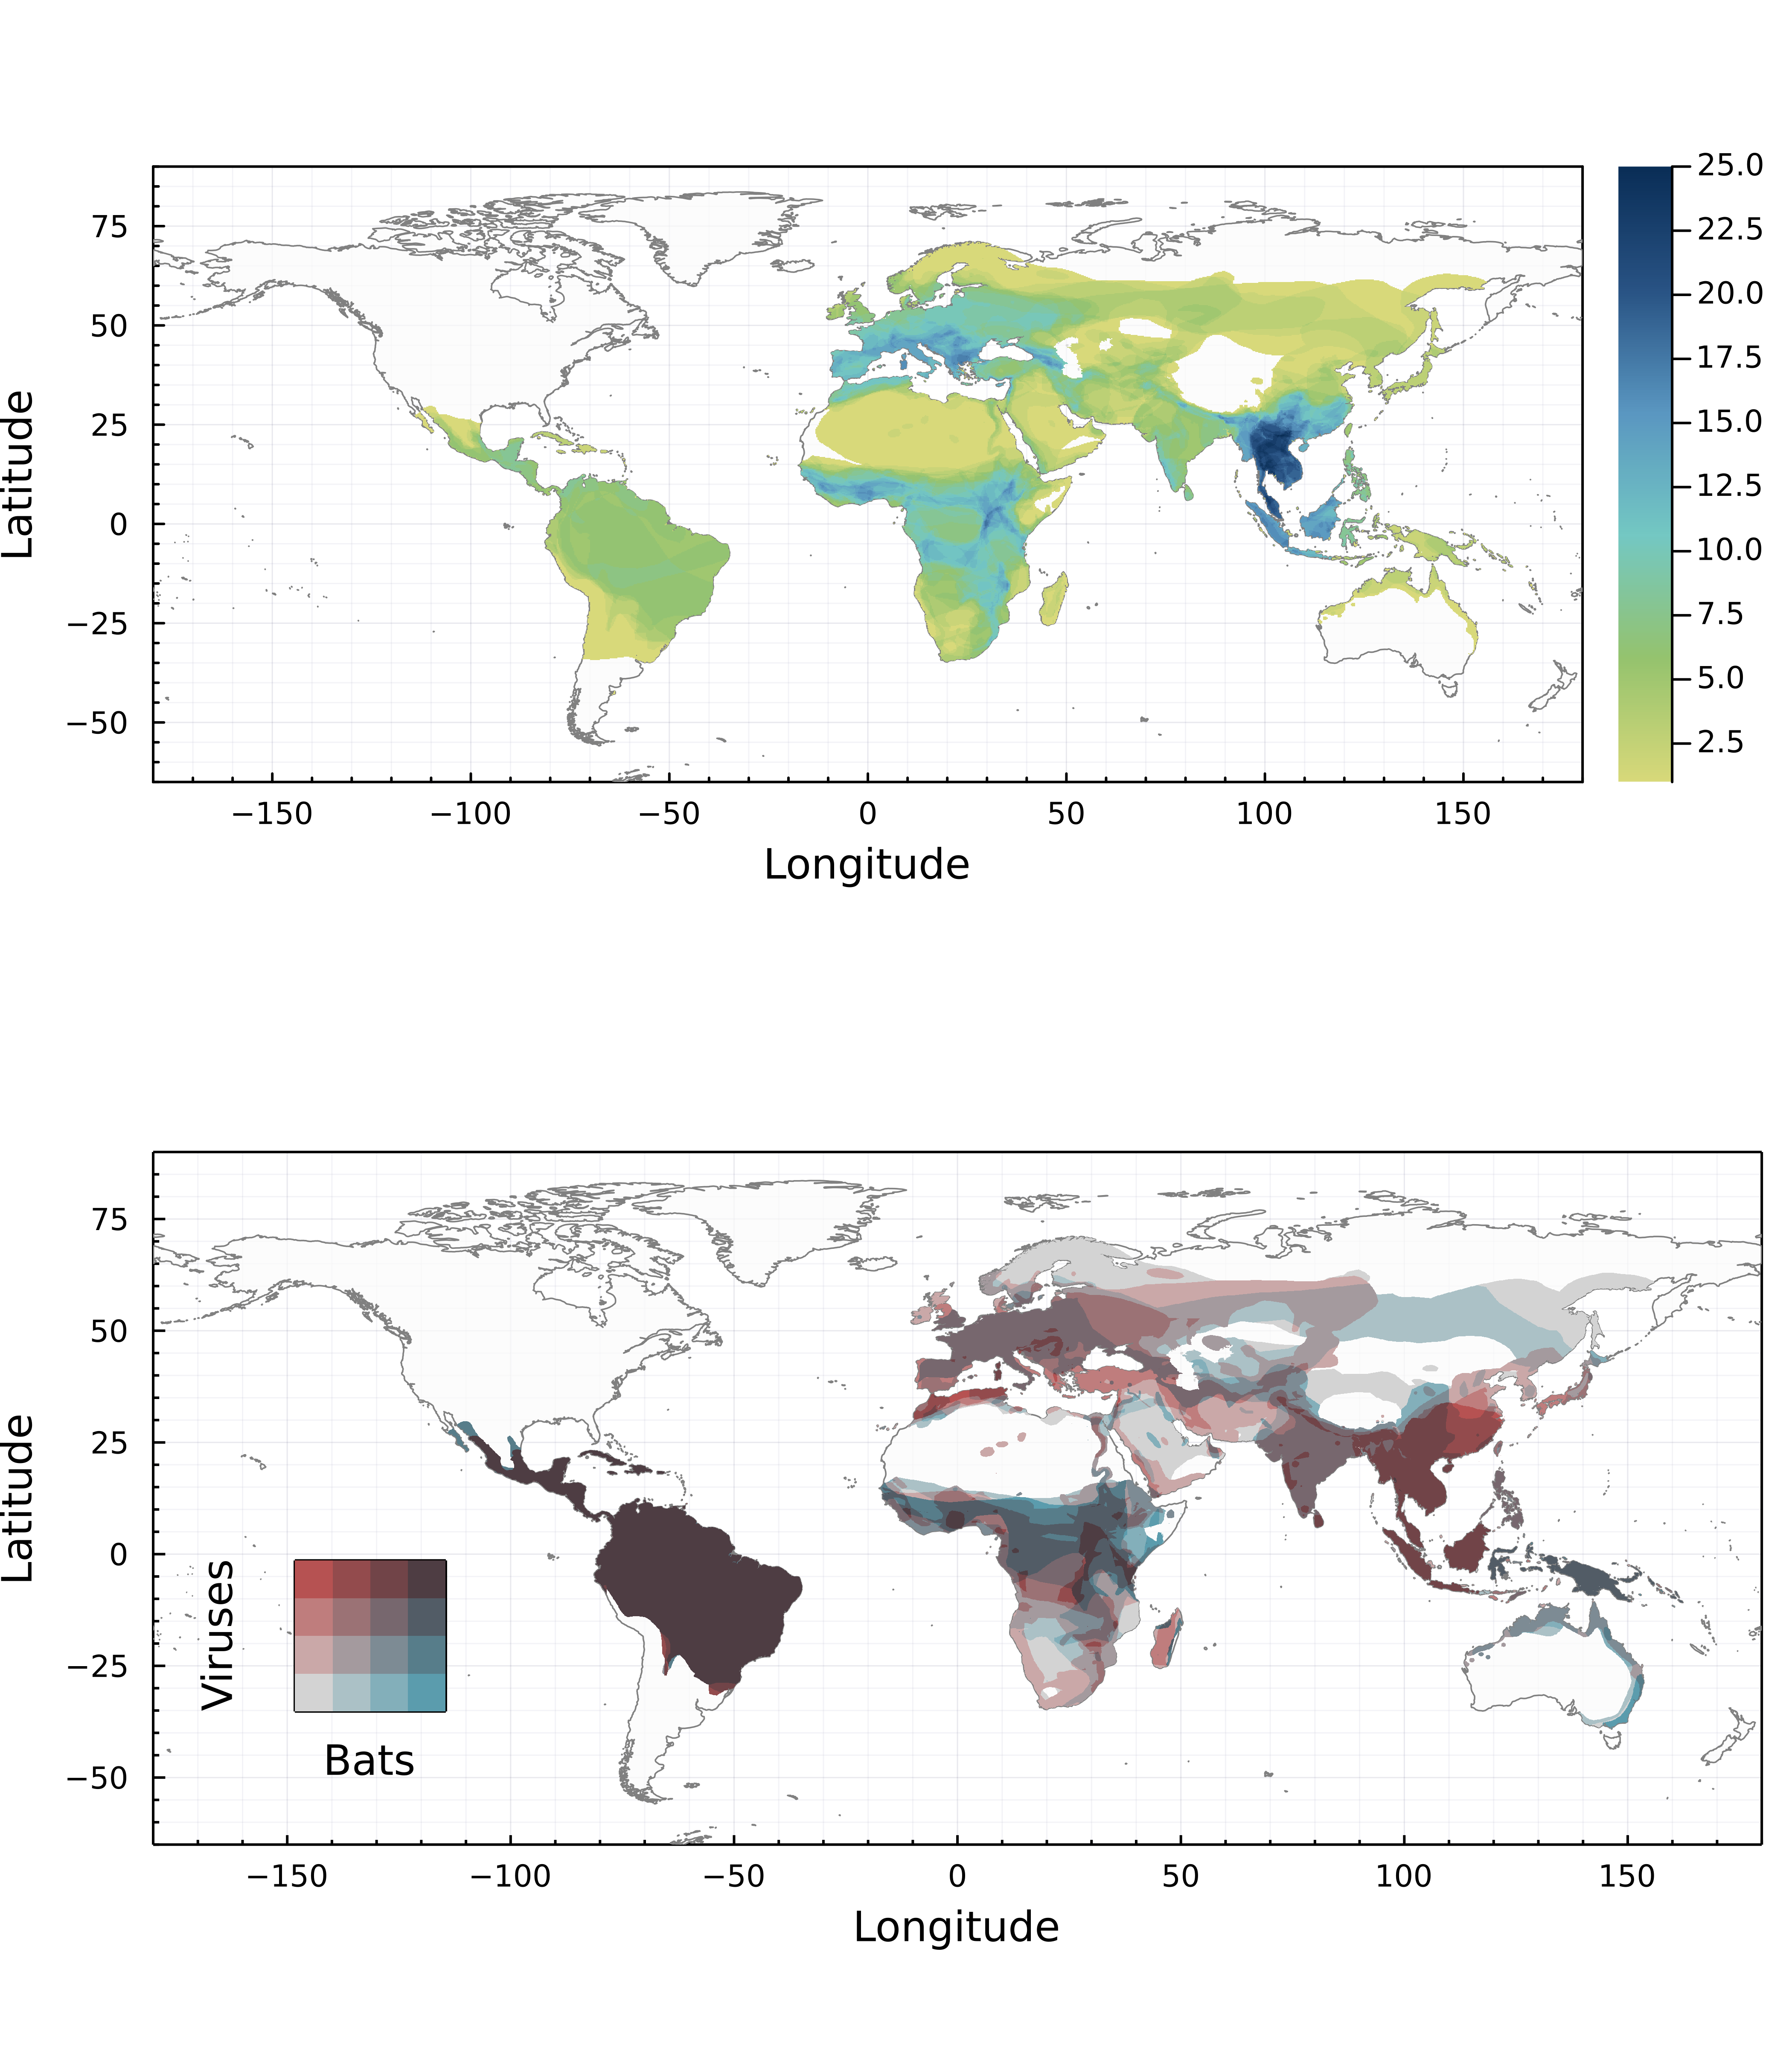 Figure 2: Bat and betacoronavirus diversity. Top panel: diversity of known bat hosts of betacoronaviruses in our dataset. This map shows that the region with the largest number of possible hosts is South-Eastern Asia. Bottom panel: congruence between the evolutionary distinctiveness of the hosts (grey to blue) and the viruses (grey to red). Darker areas have higher combined evolutionary distinctiveness for the entire bat-virus system.